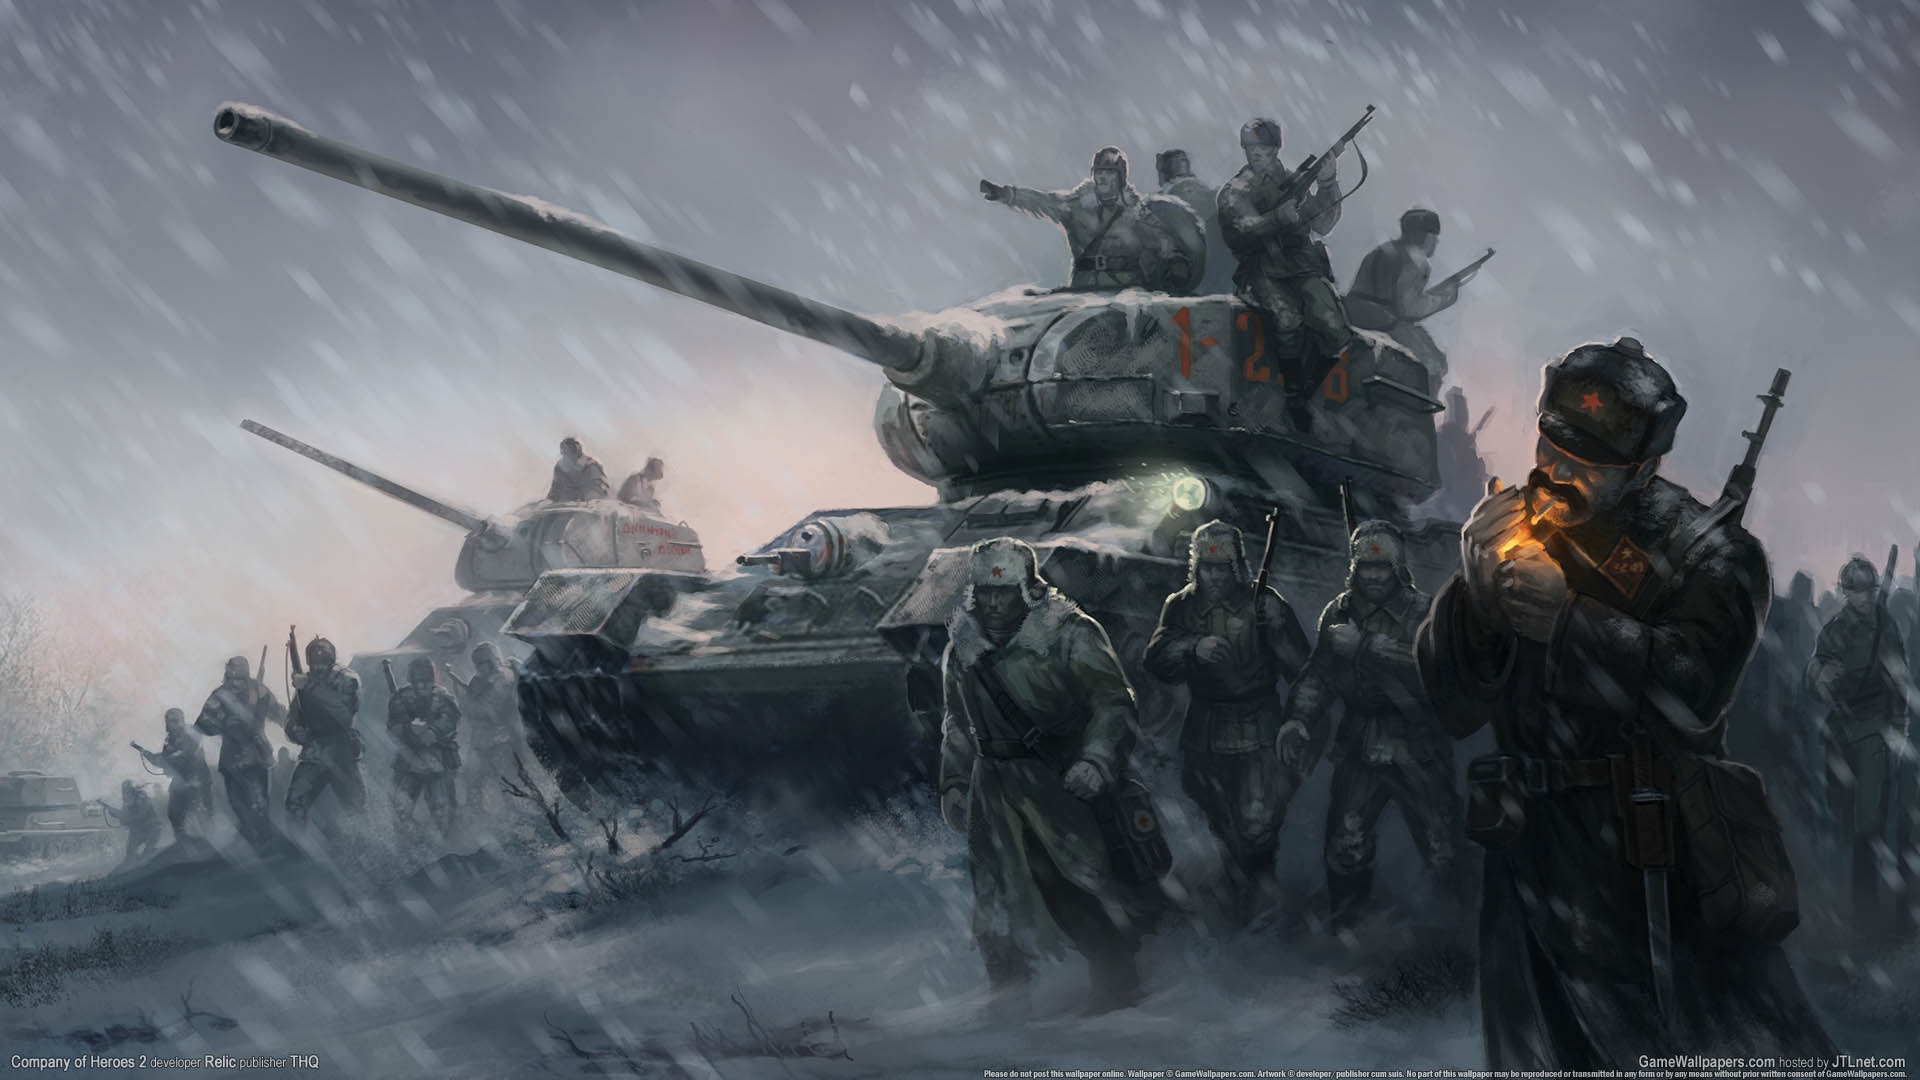 Company of Heroes 2 for 1920 x 1080 HDTV 1080p resolution